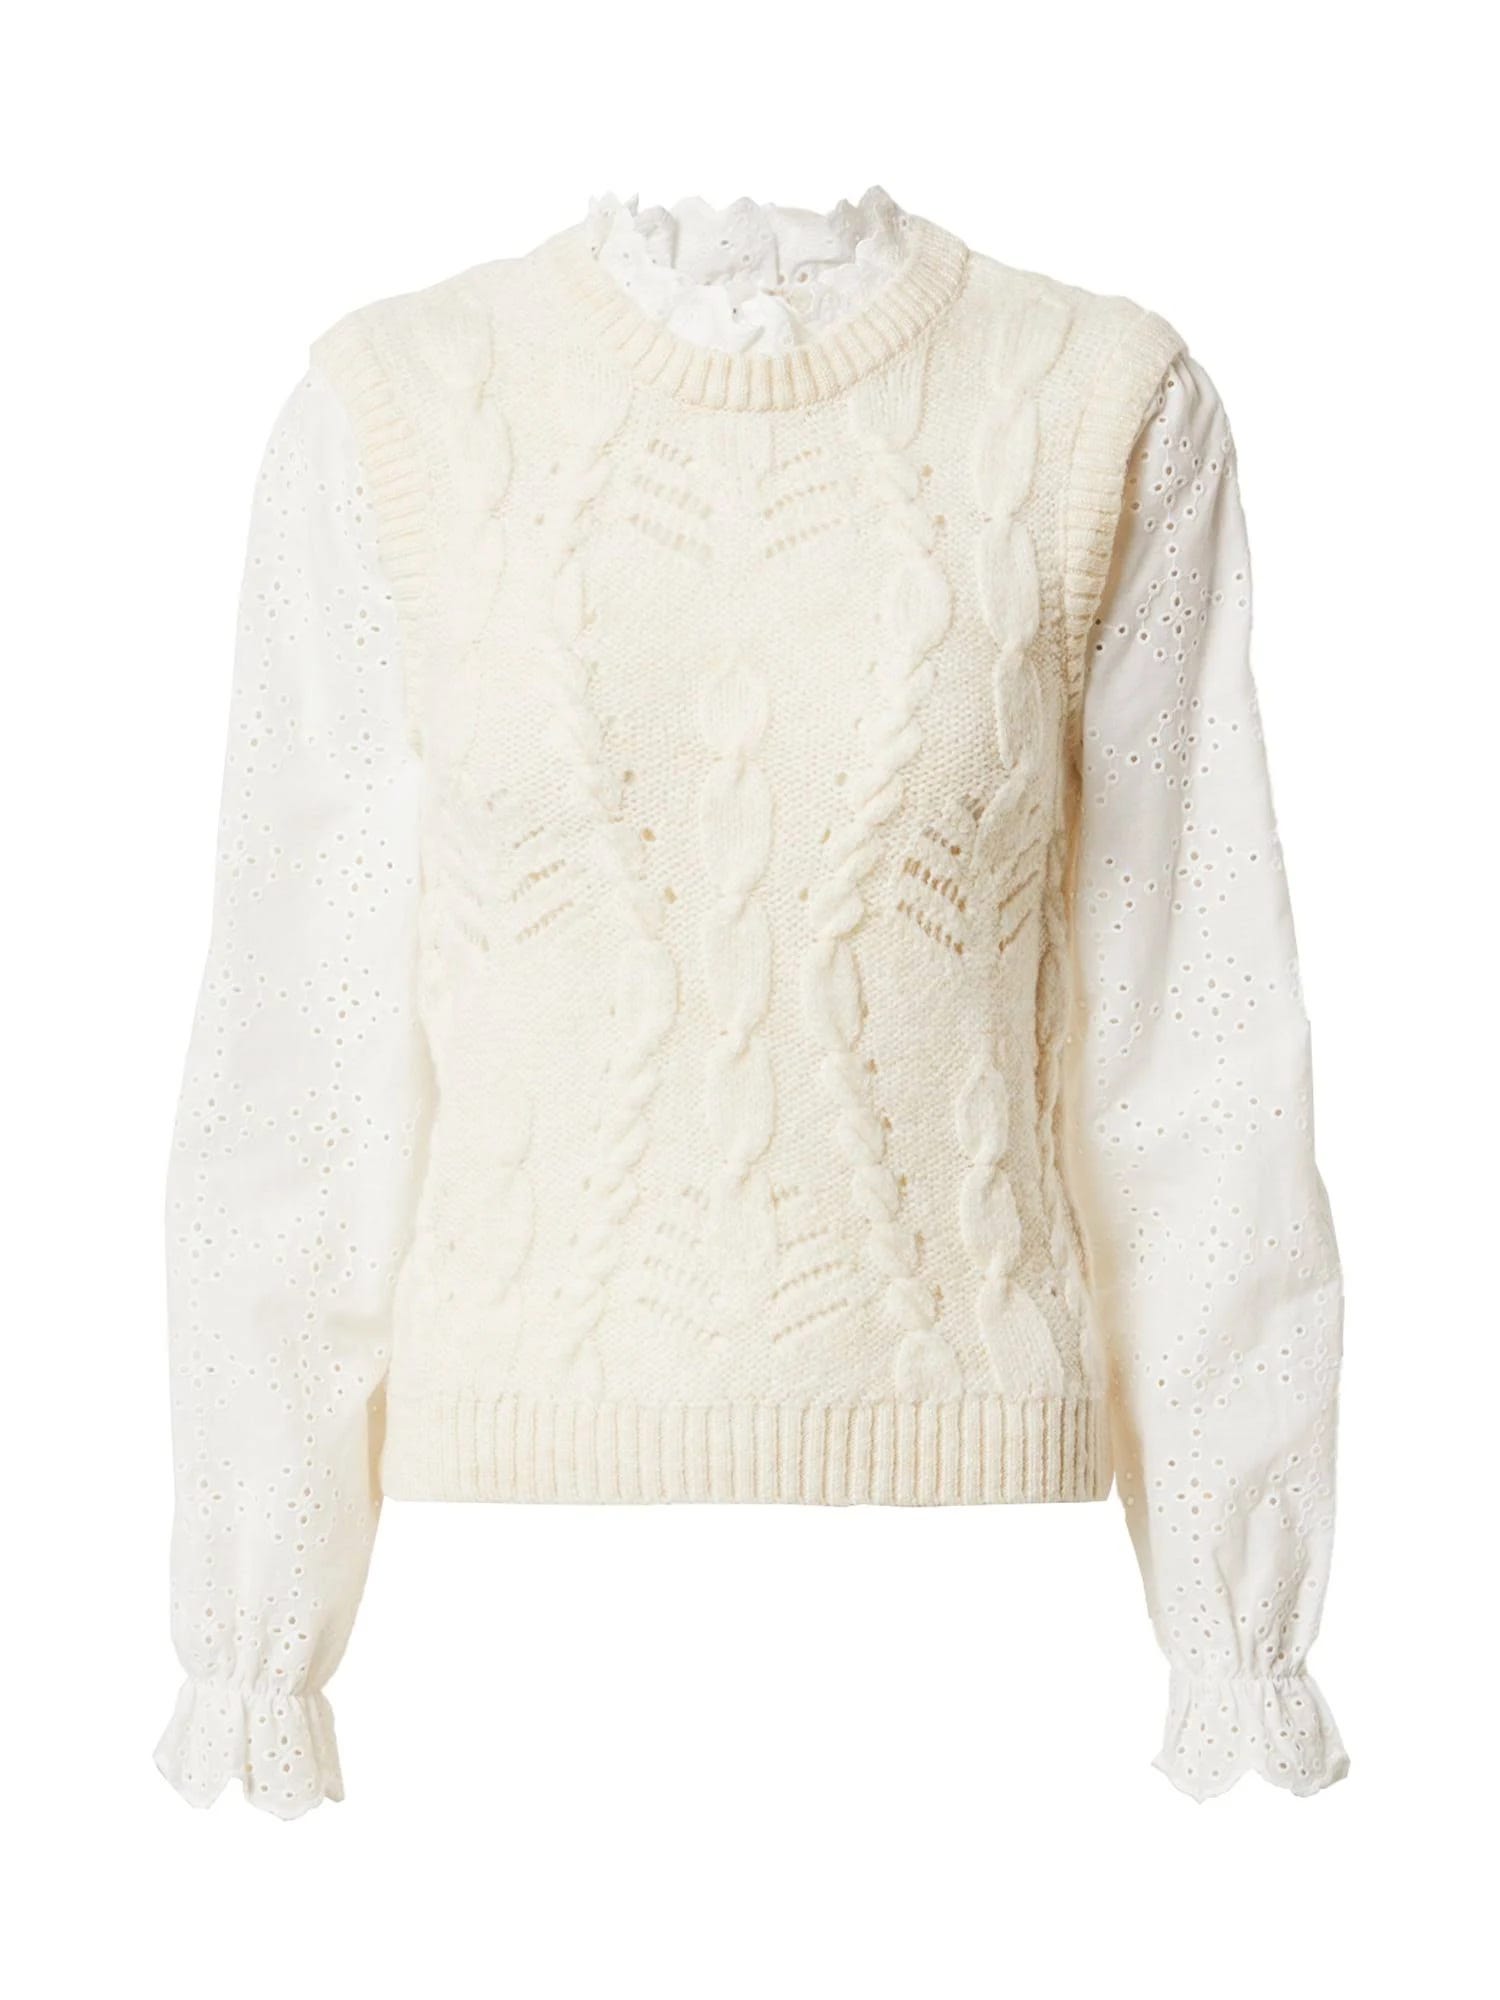 White Hybrid Cable Knit Sweater Jumper by River Island | Image